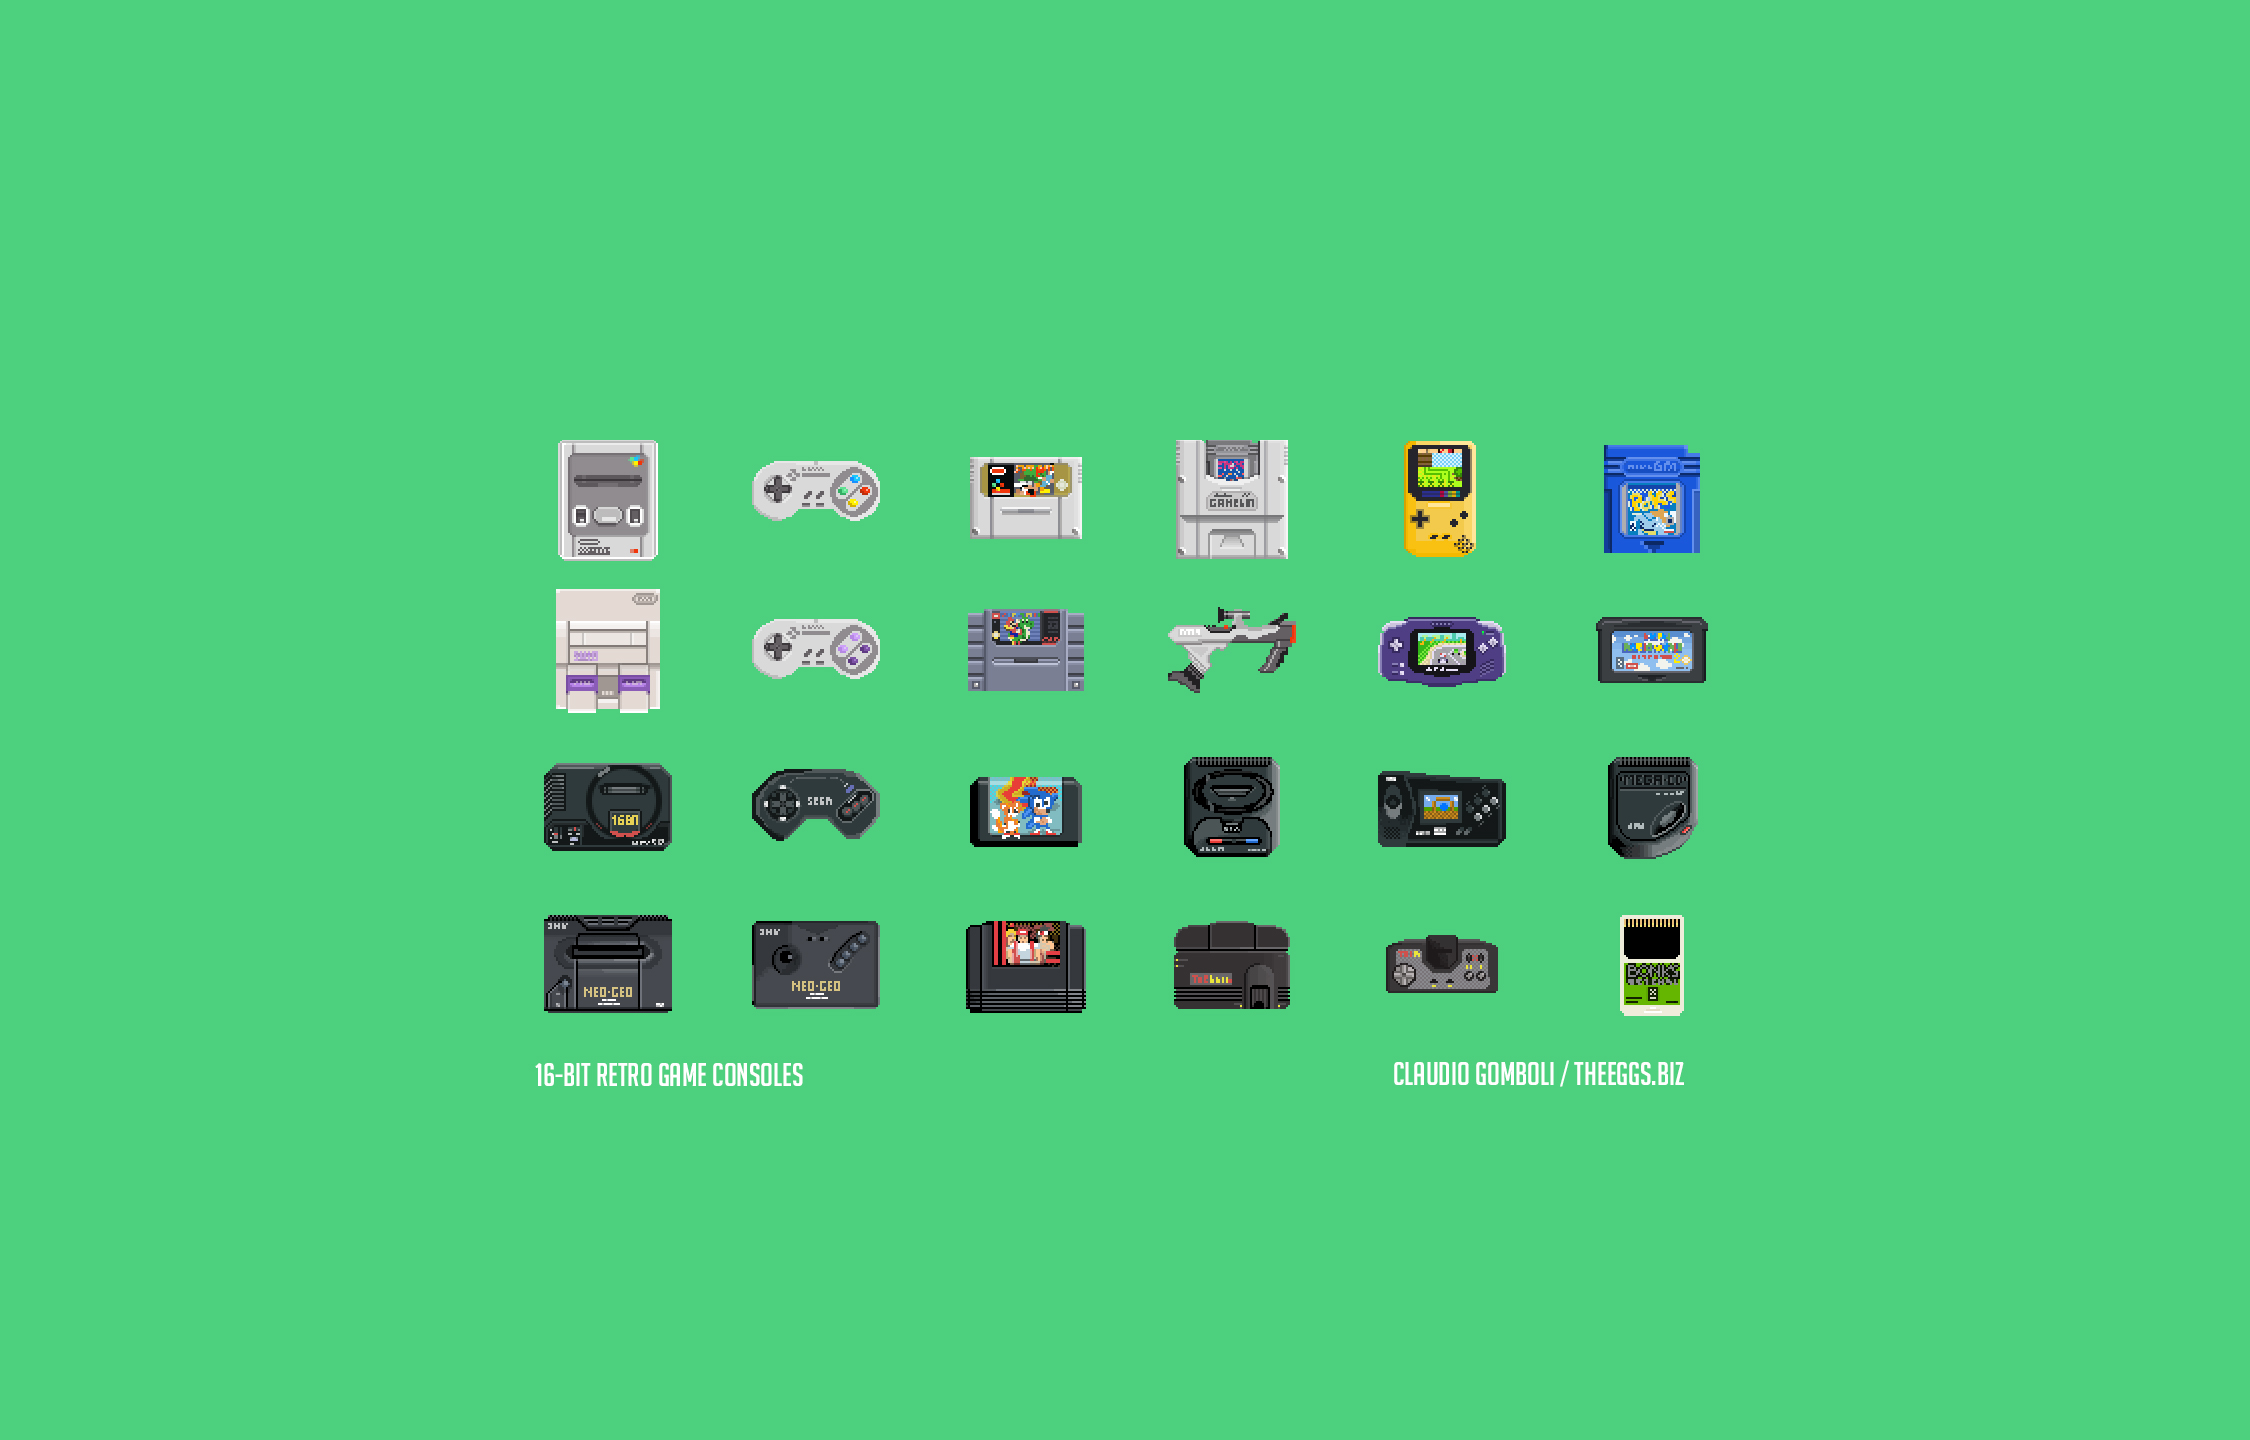 download 16 bit retro game console wallpapers for these devices 2250x1440